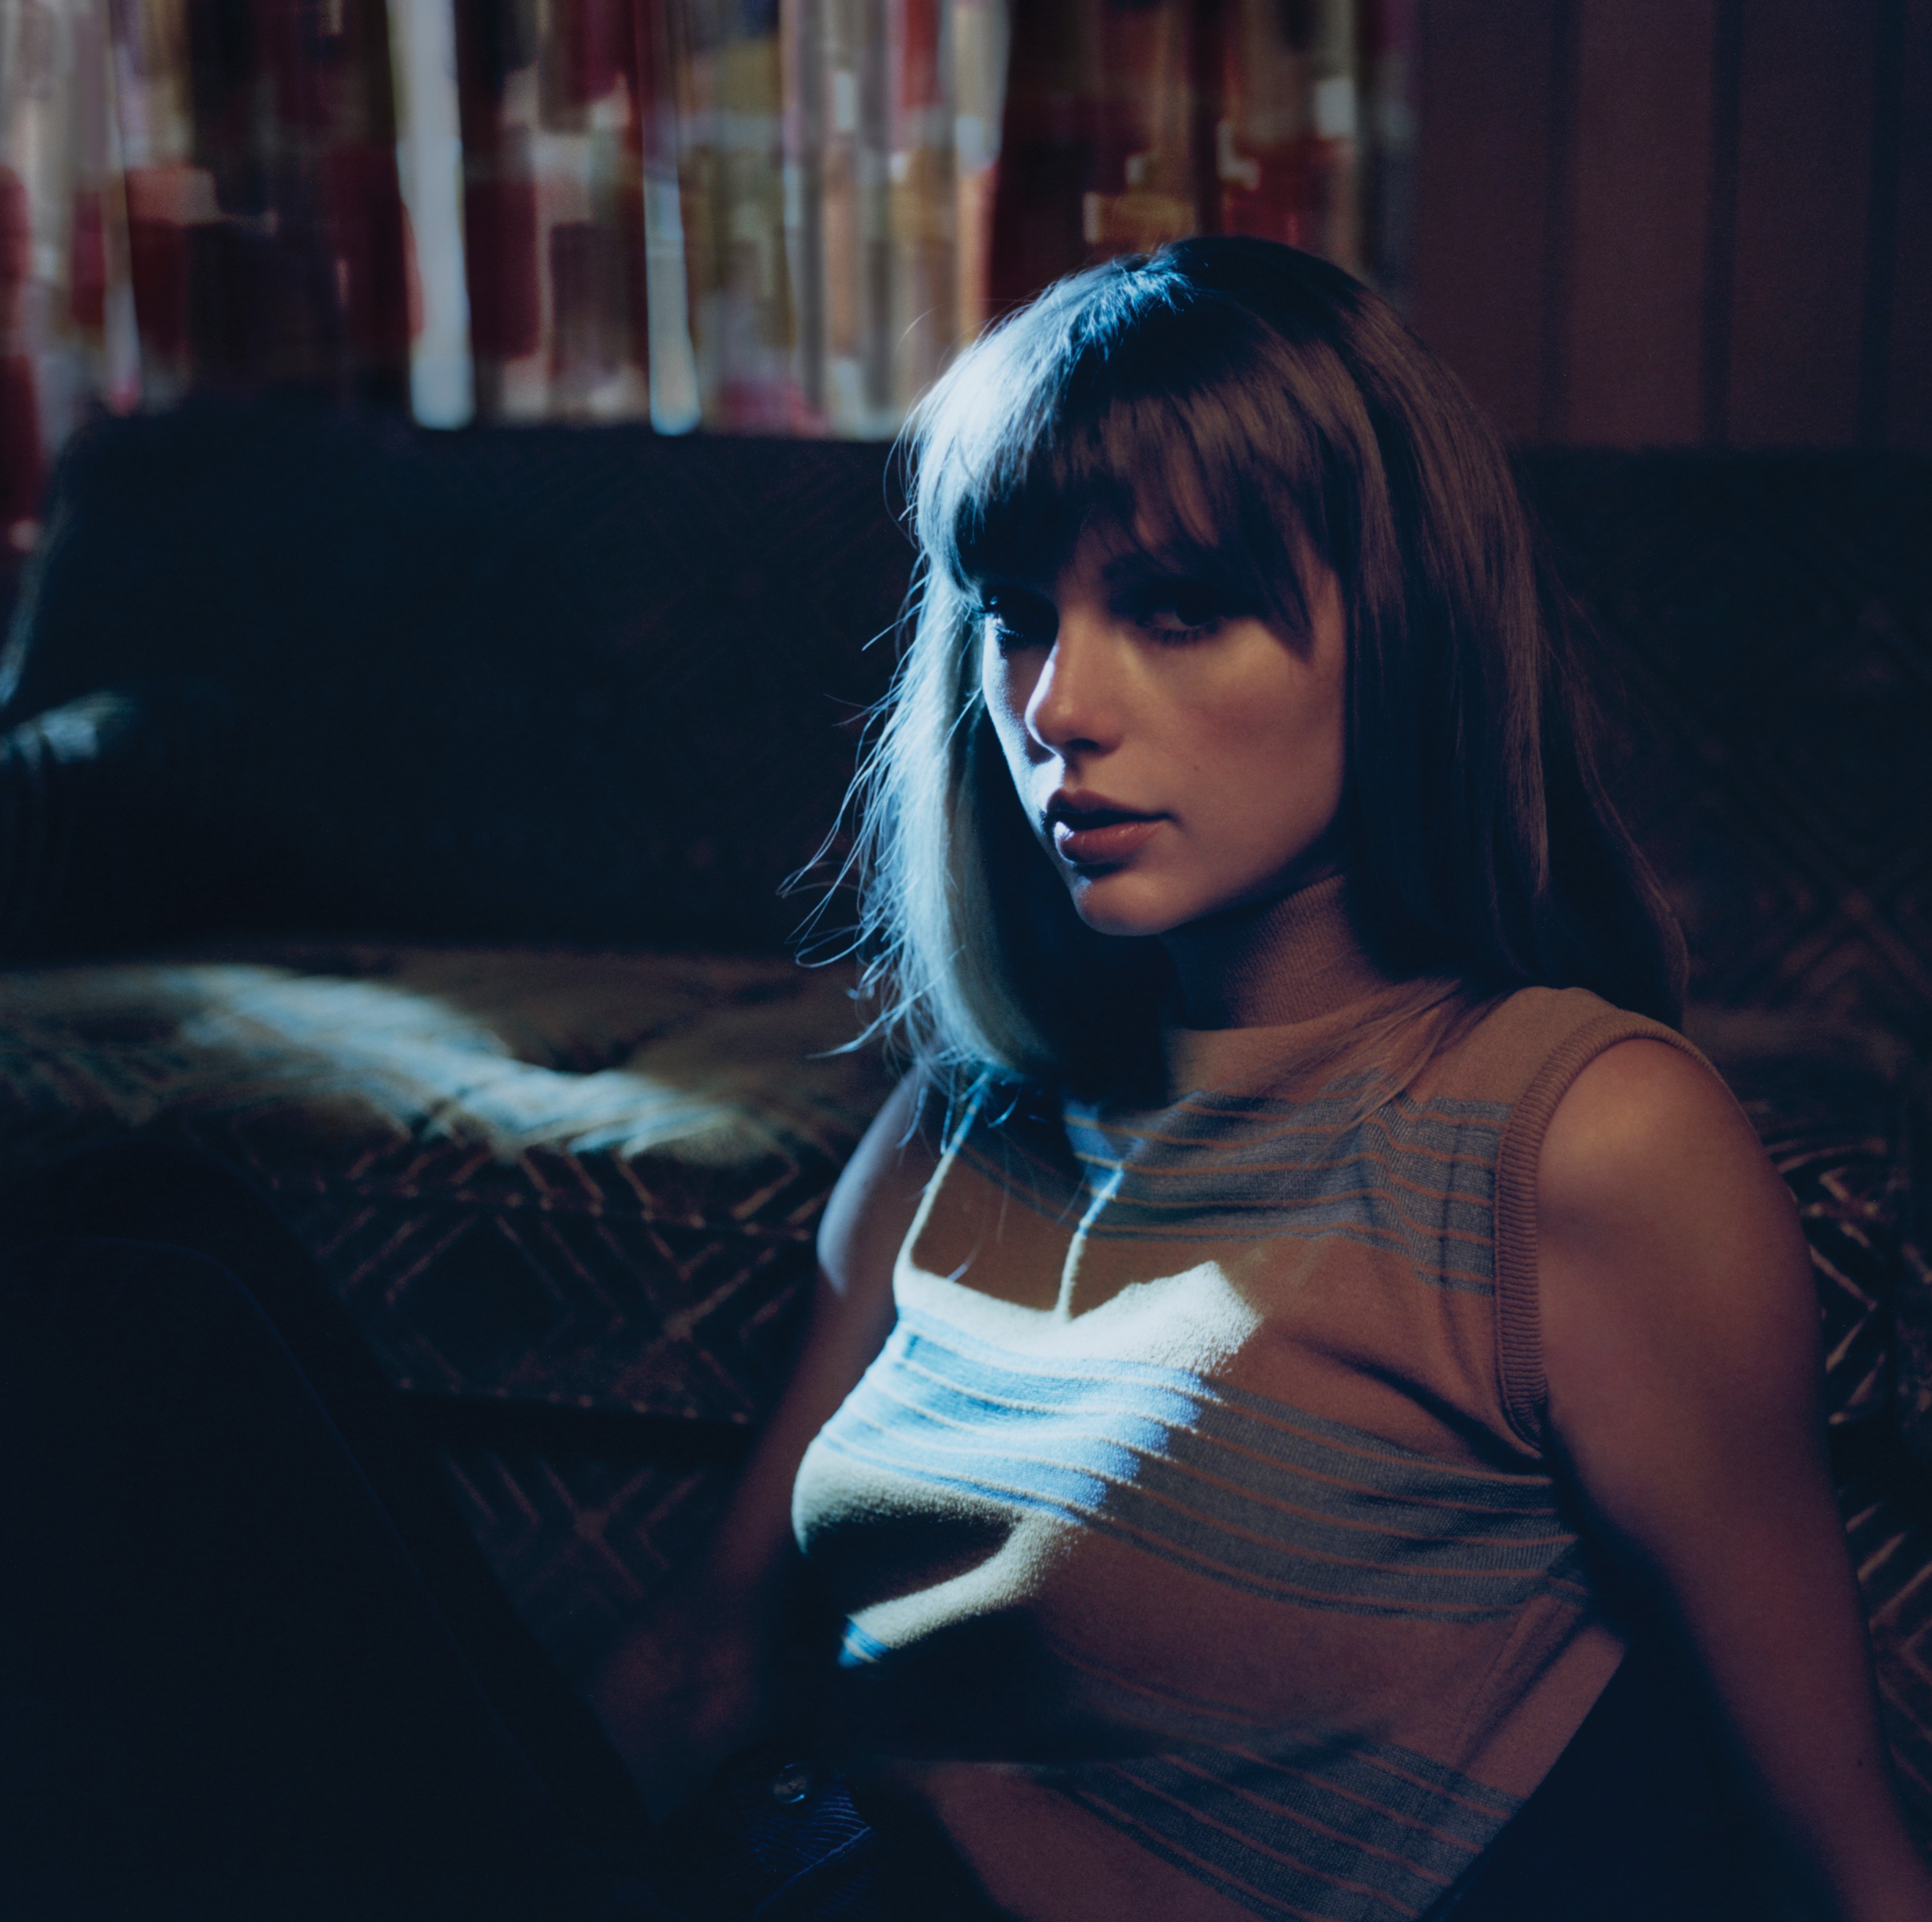 taylor sits in front of a couch in a dark room wearing a striped tank top